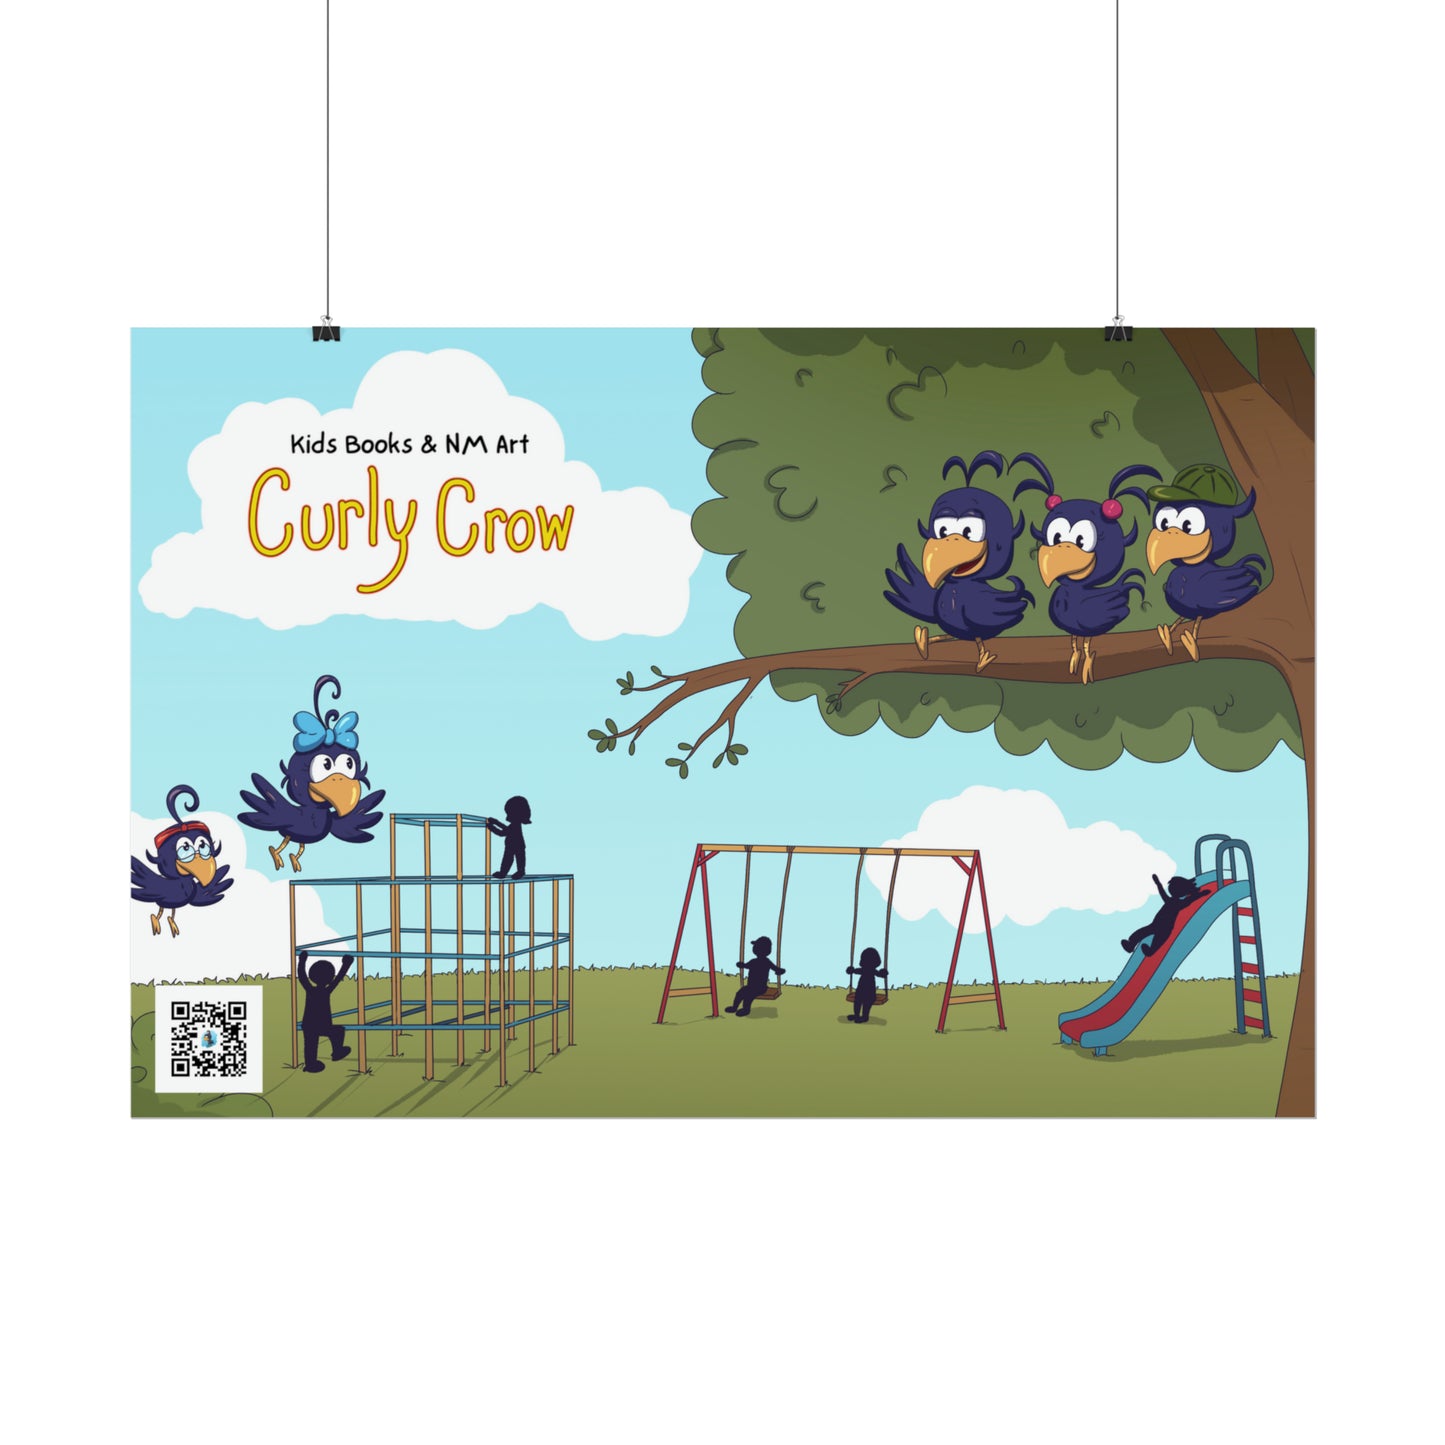 Curly Crow and Friends Poster